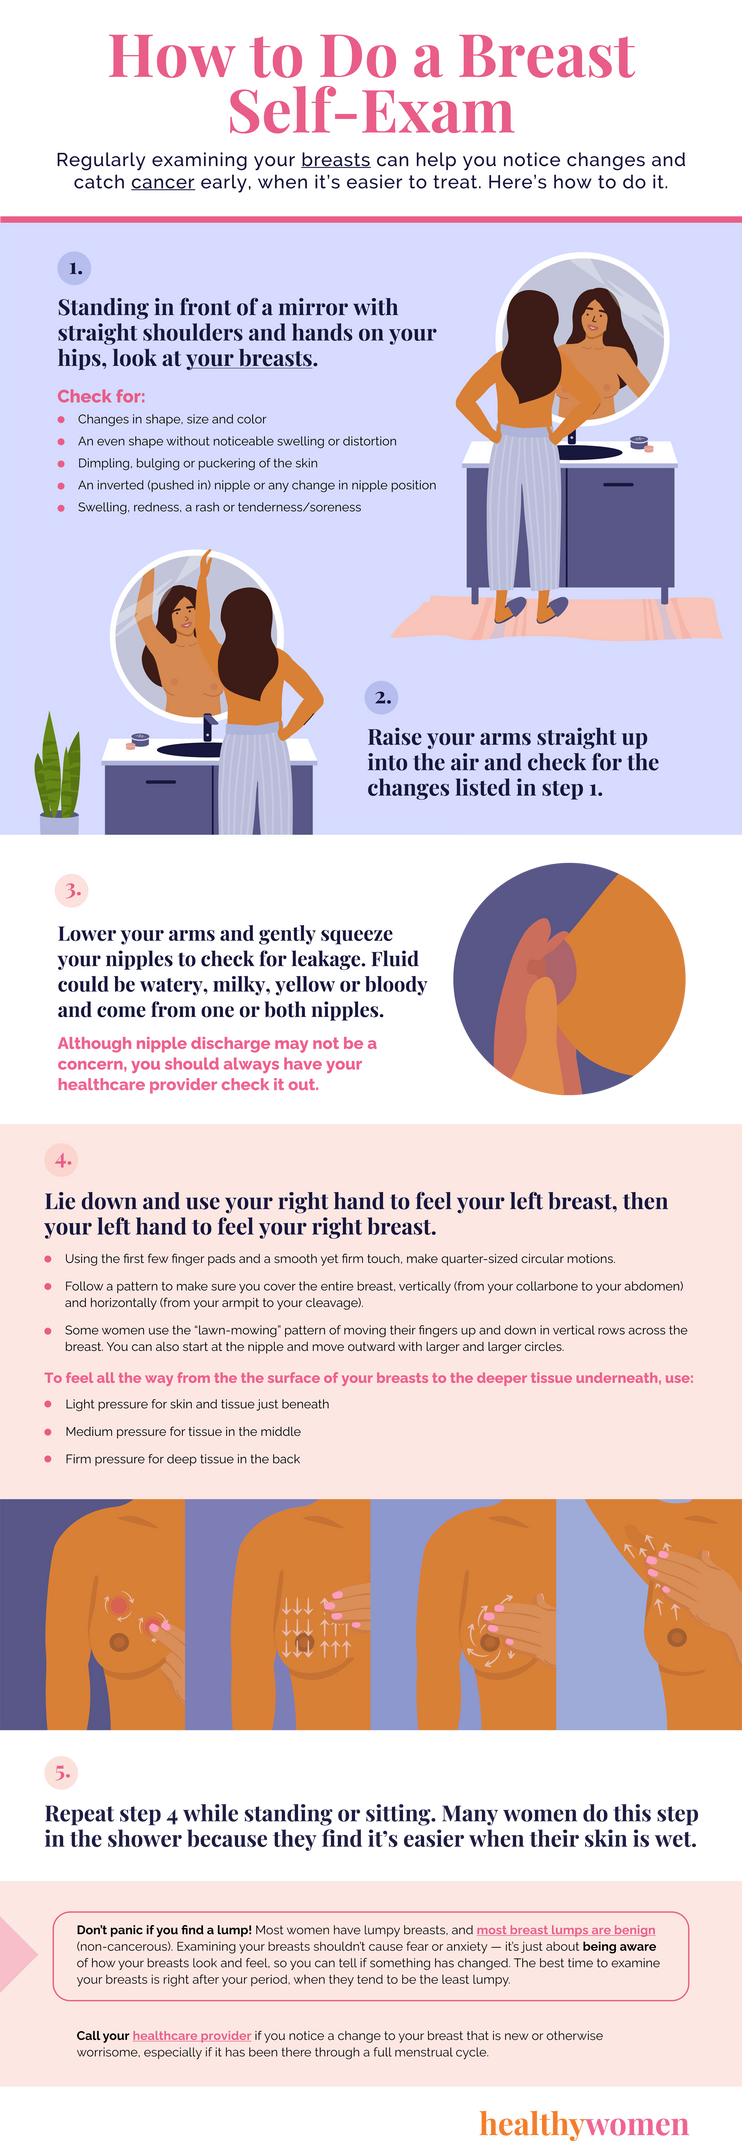 Normal Breast Changes Over a Lifetime - HealthyWomen